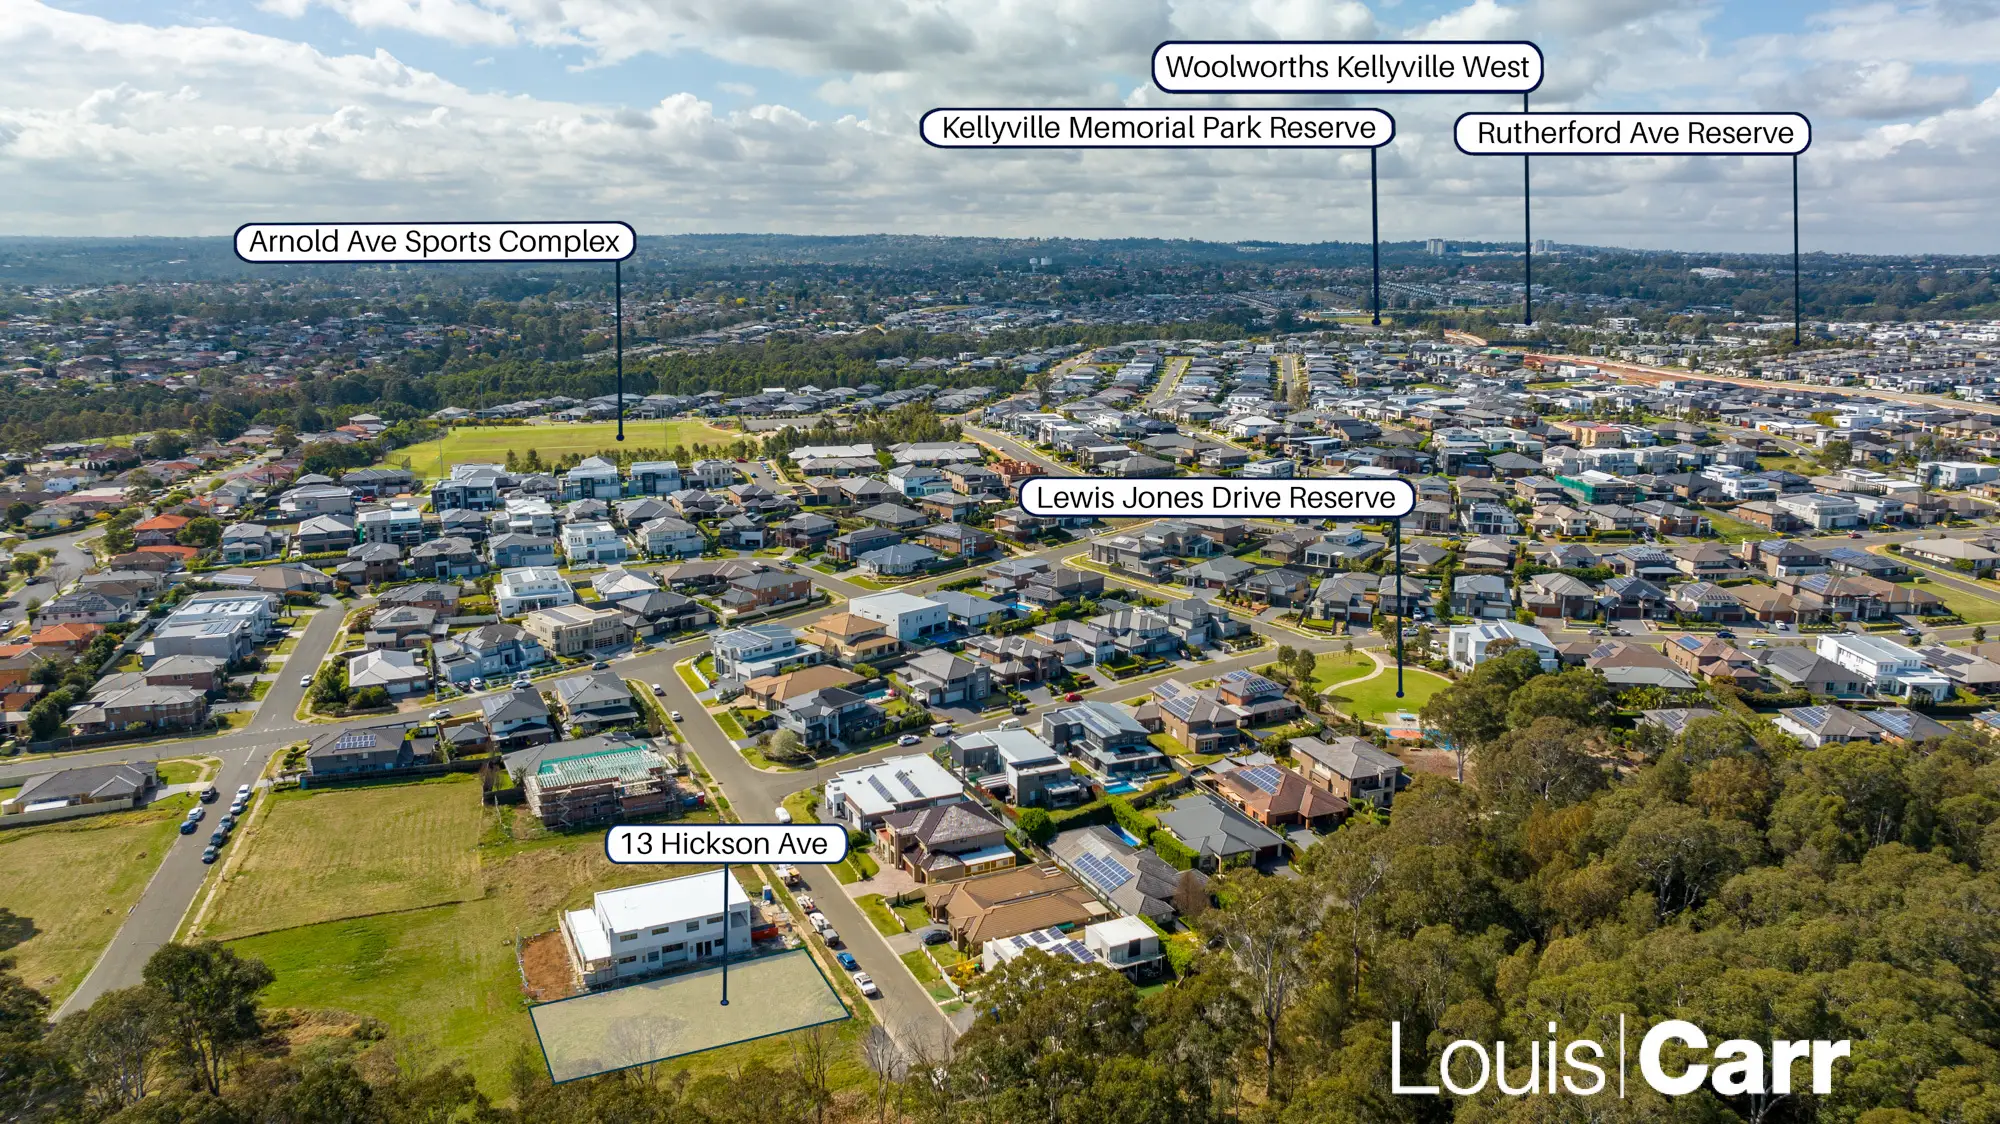 Photo #4: 13 Hickson Avenue, Kellyville - For Sale by Louis Carr Real Estate